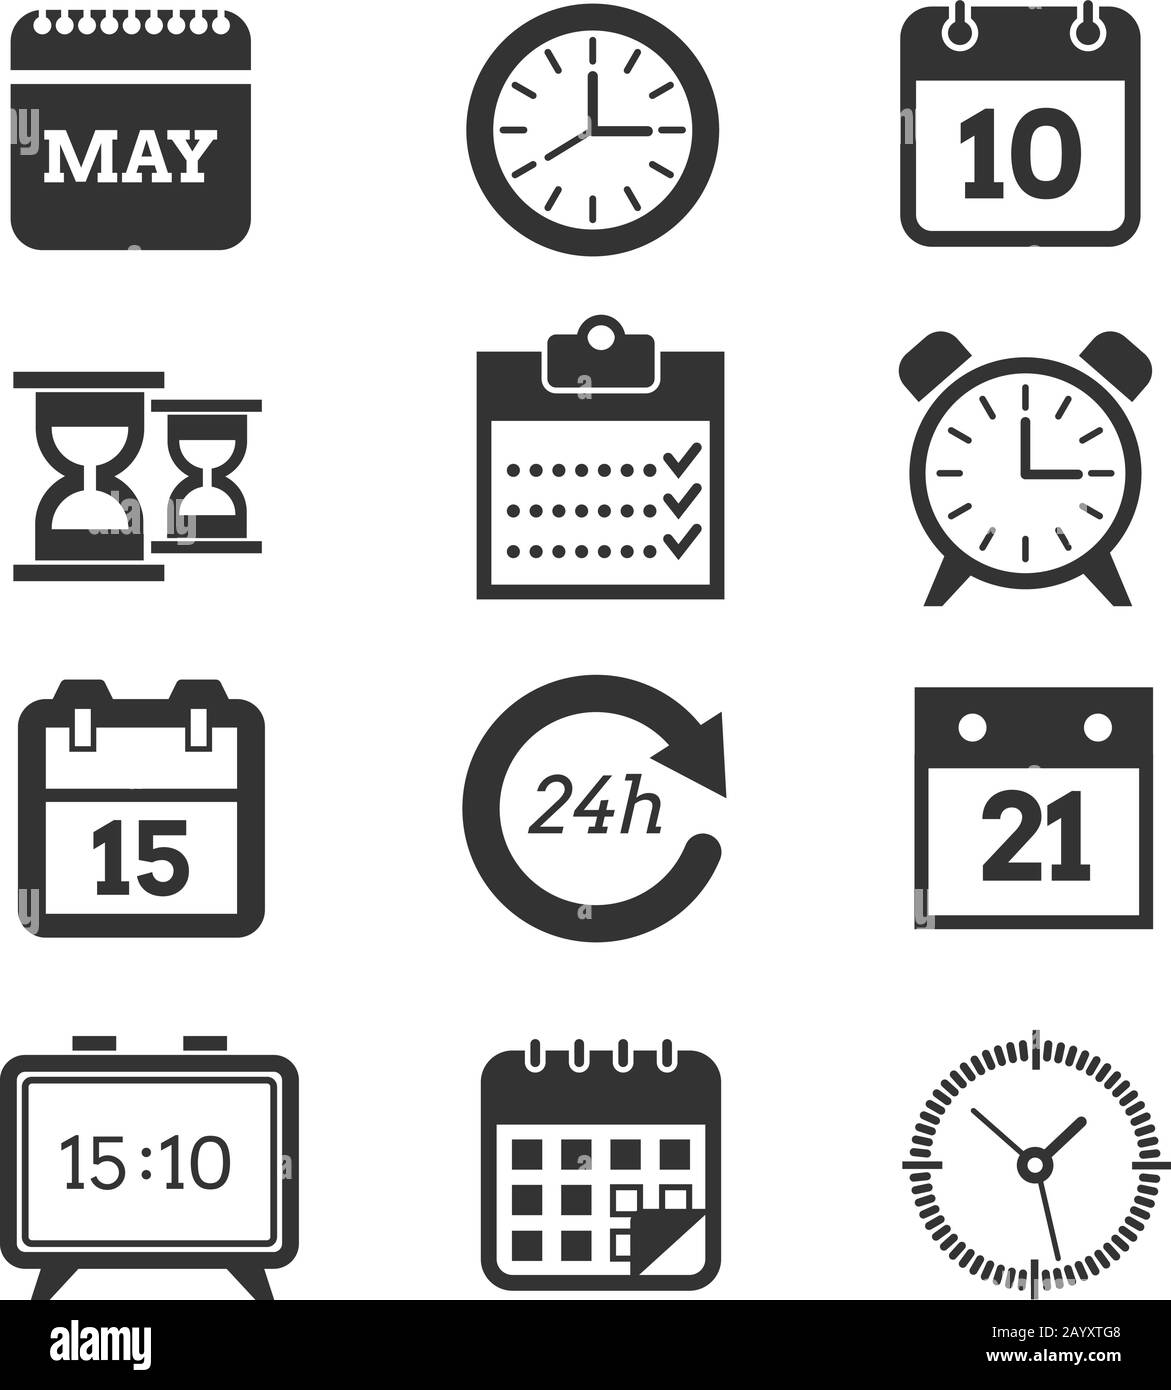 Time and schedule vector icons. Set of clocks and calendars, illustration of pictogram calendar and clock for business Stock Vector